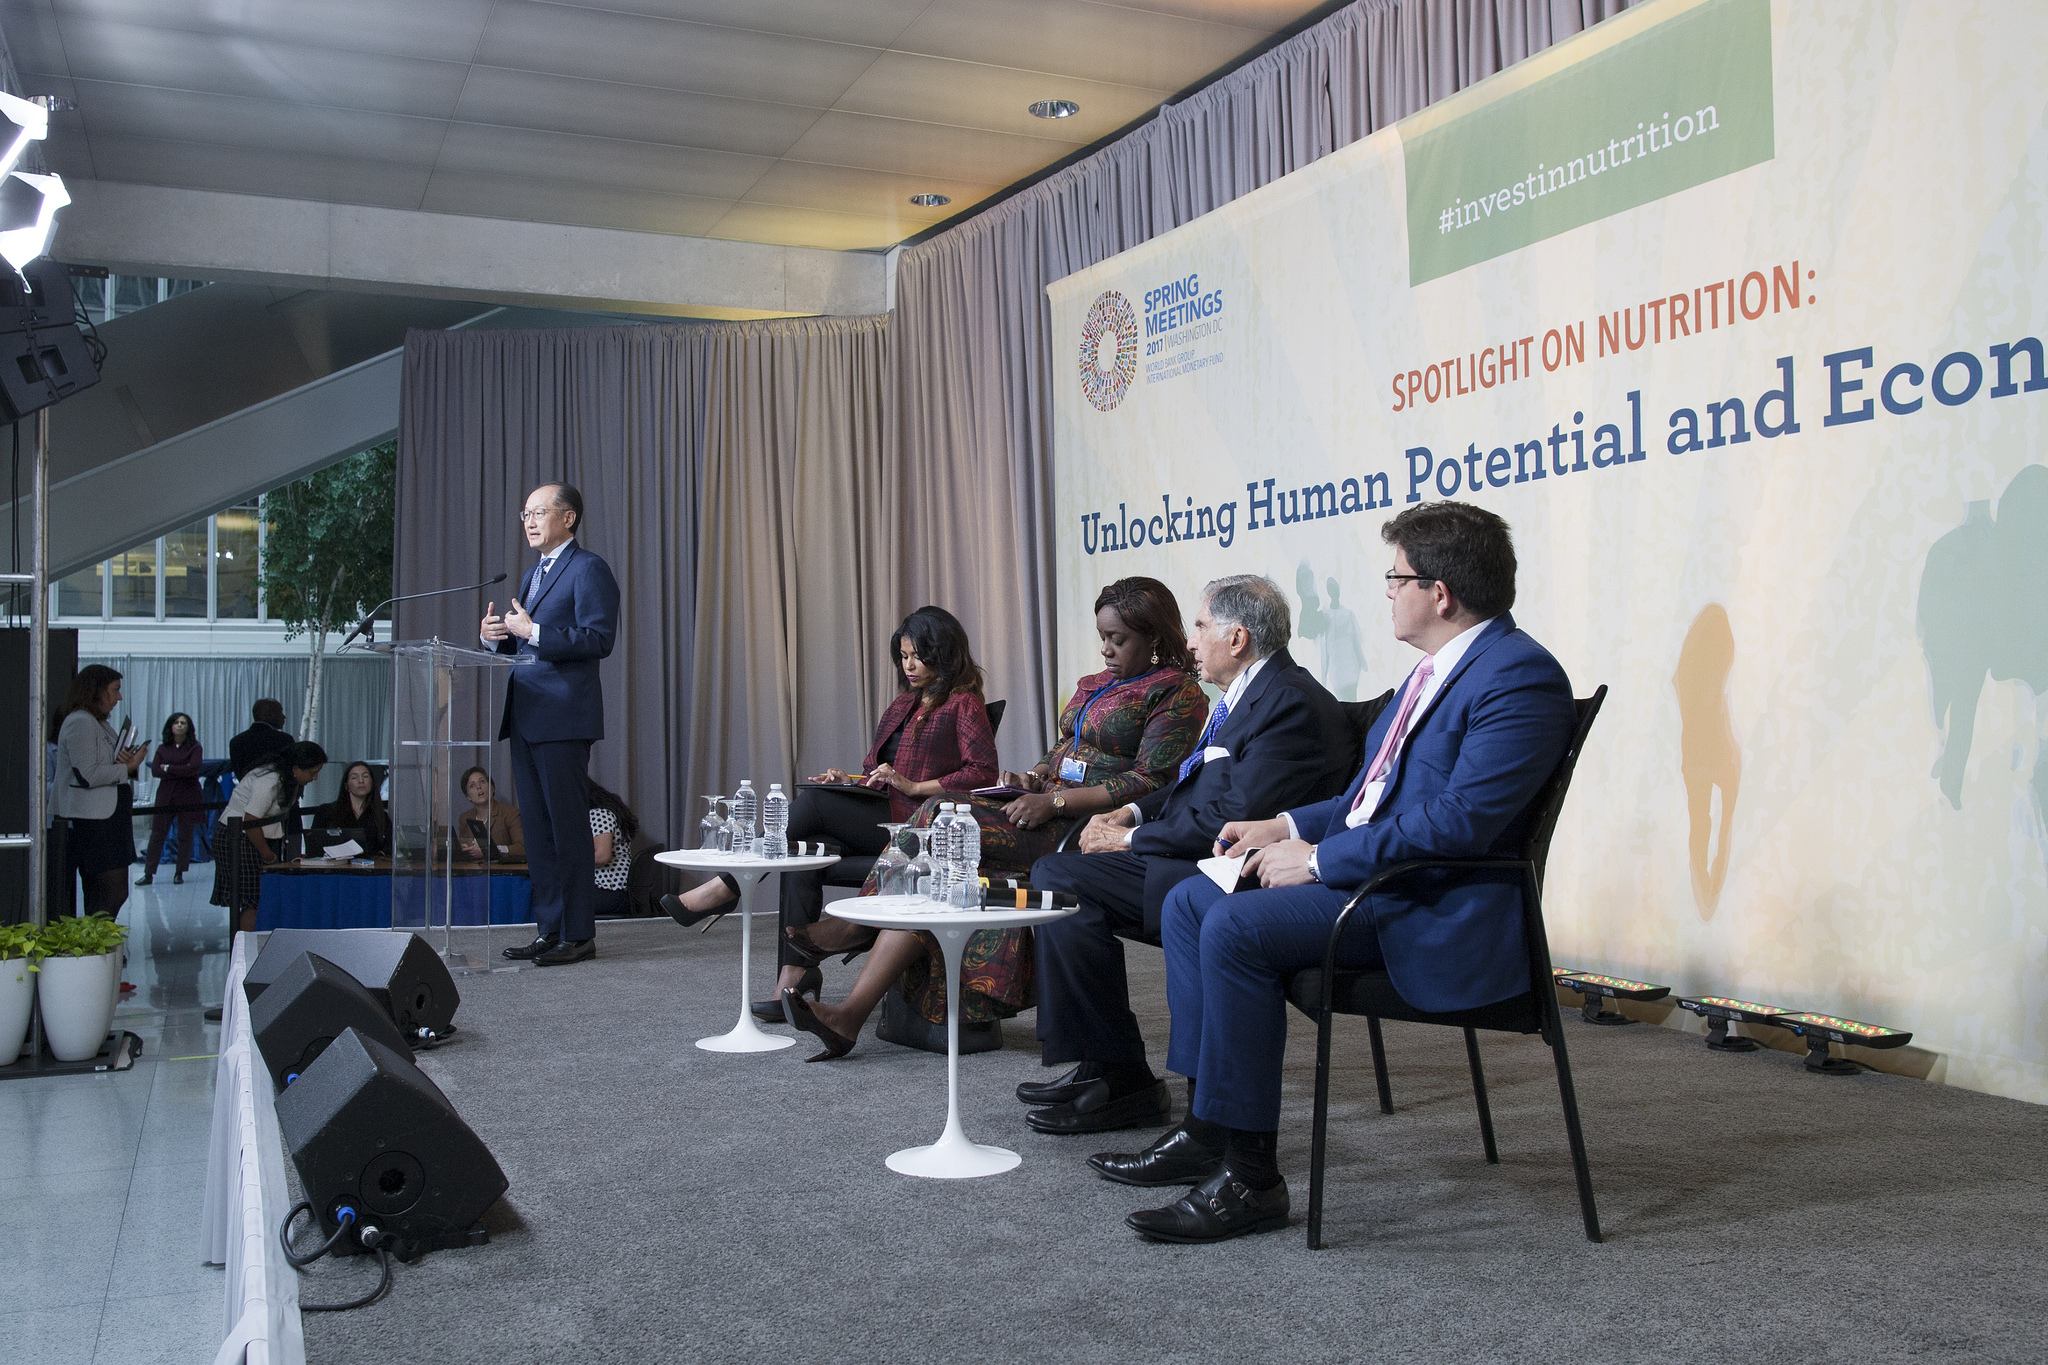 The World Bank puts a spotlight on nutrition: Unlocking Human Potential